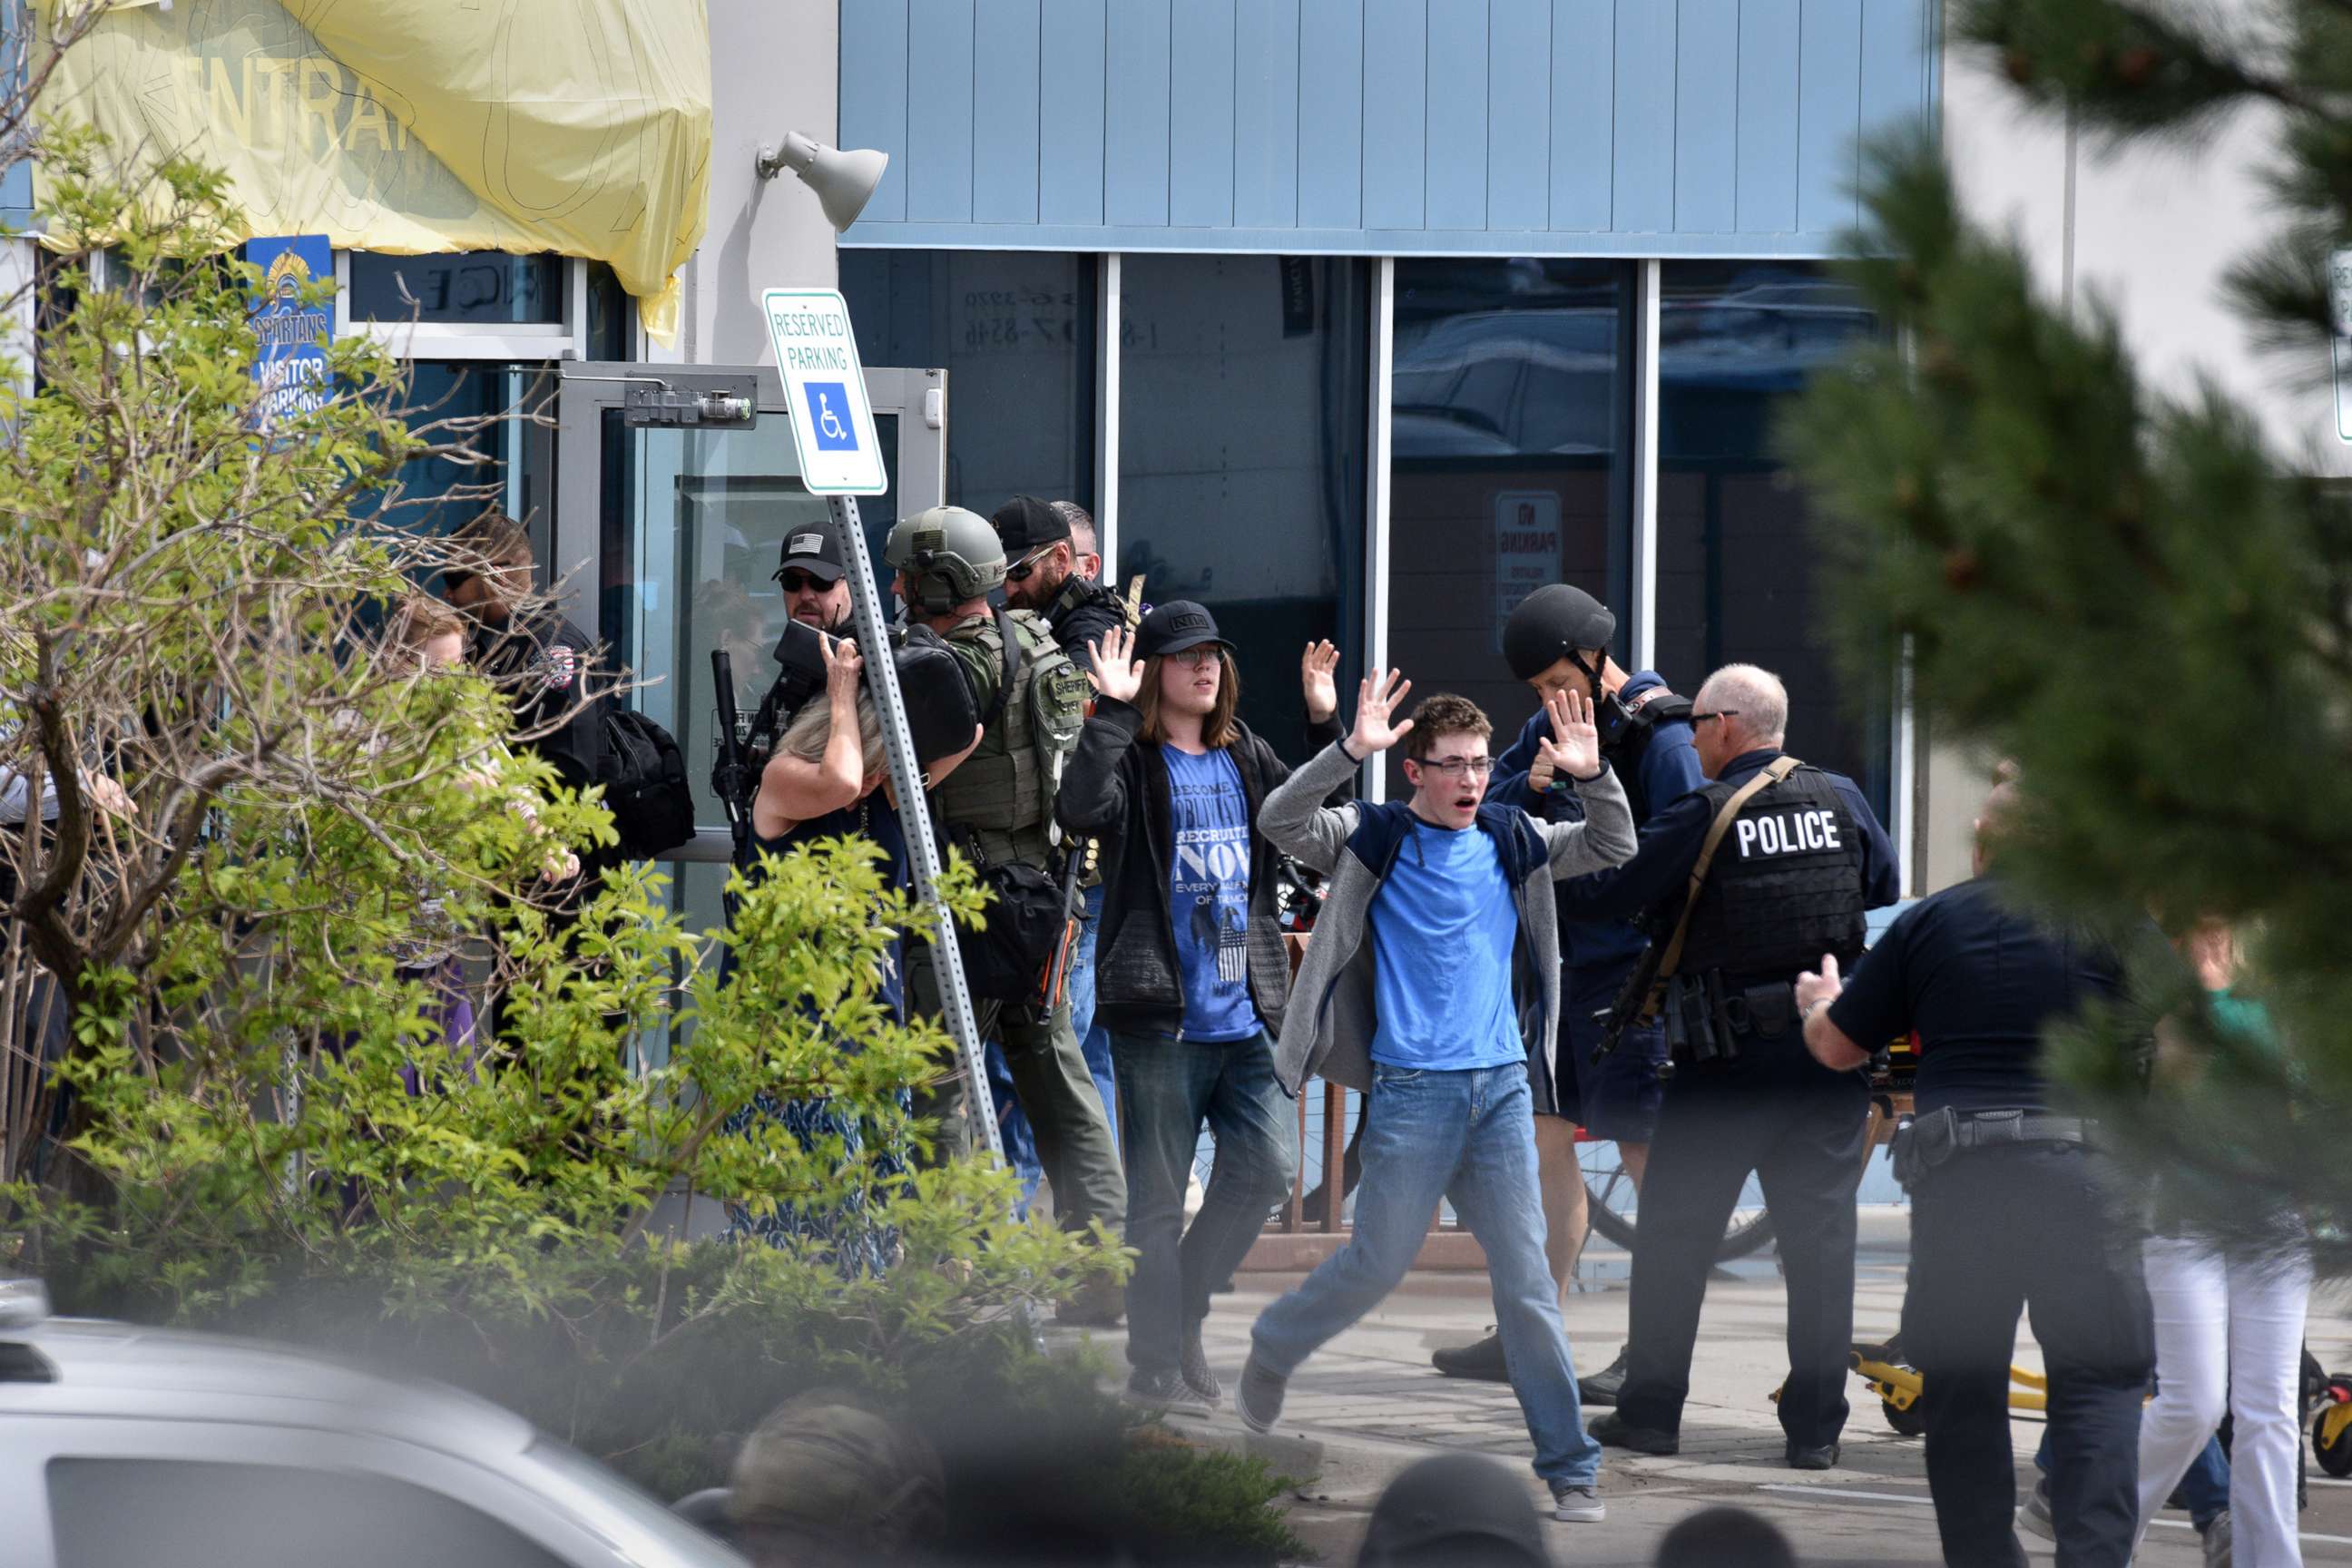 PHOTO: Students and teachers raise their hands as the exit the scene of a shooting at the STEM School Highlands Ranch, May 7, 2019, in Highlands Ranch, Colo.